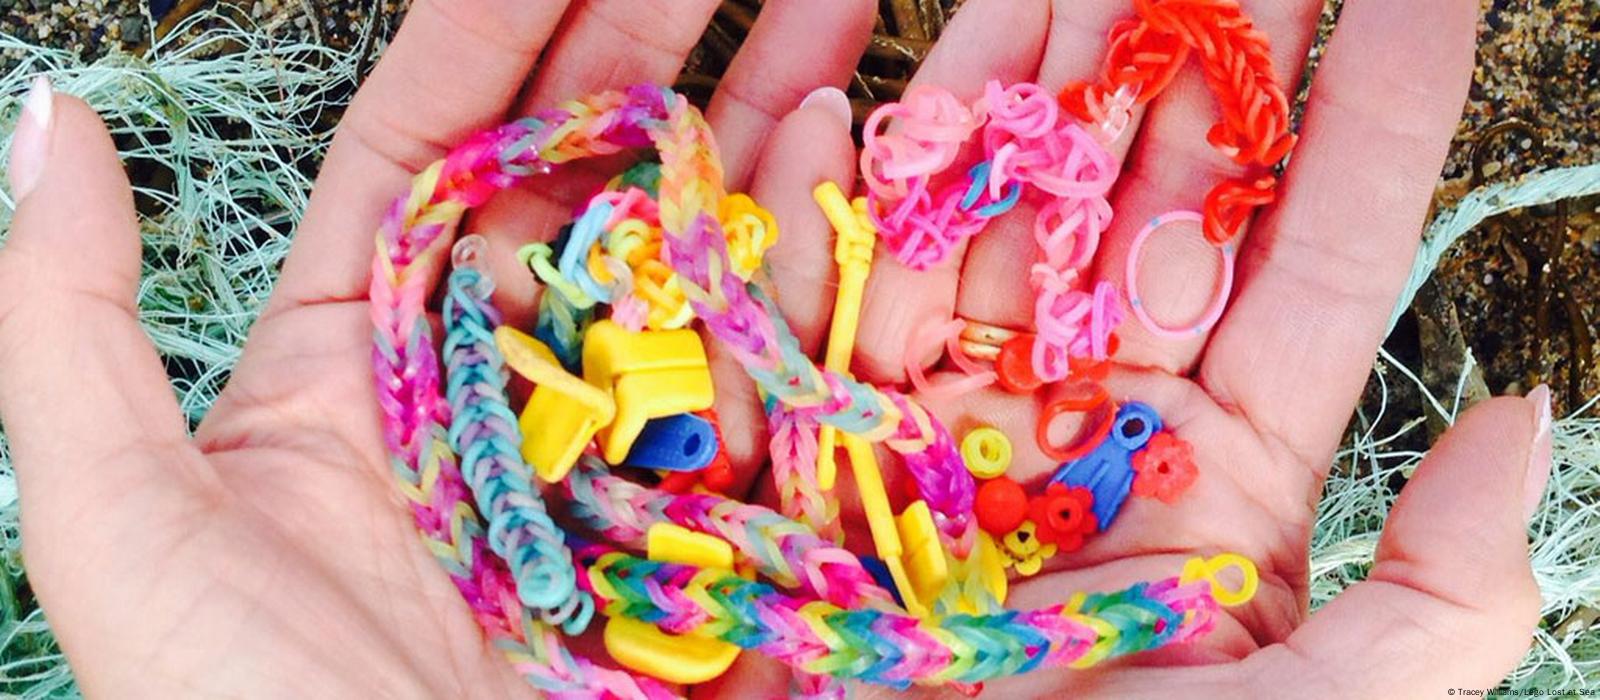 The Rainbow Loom bracelet trend is sweeping the nation - and